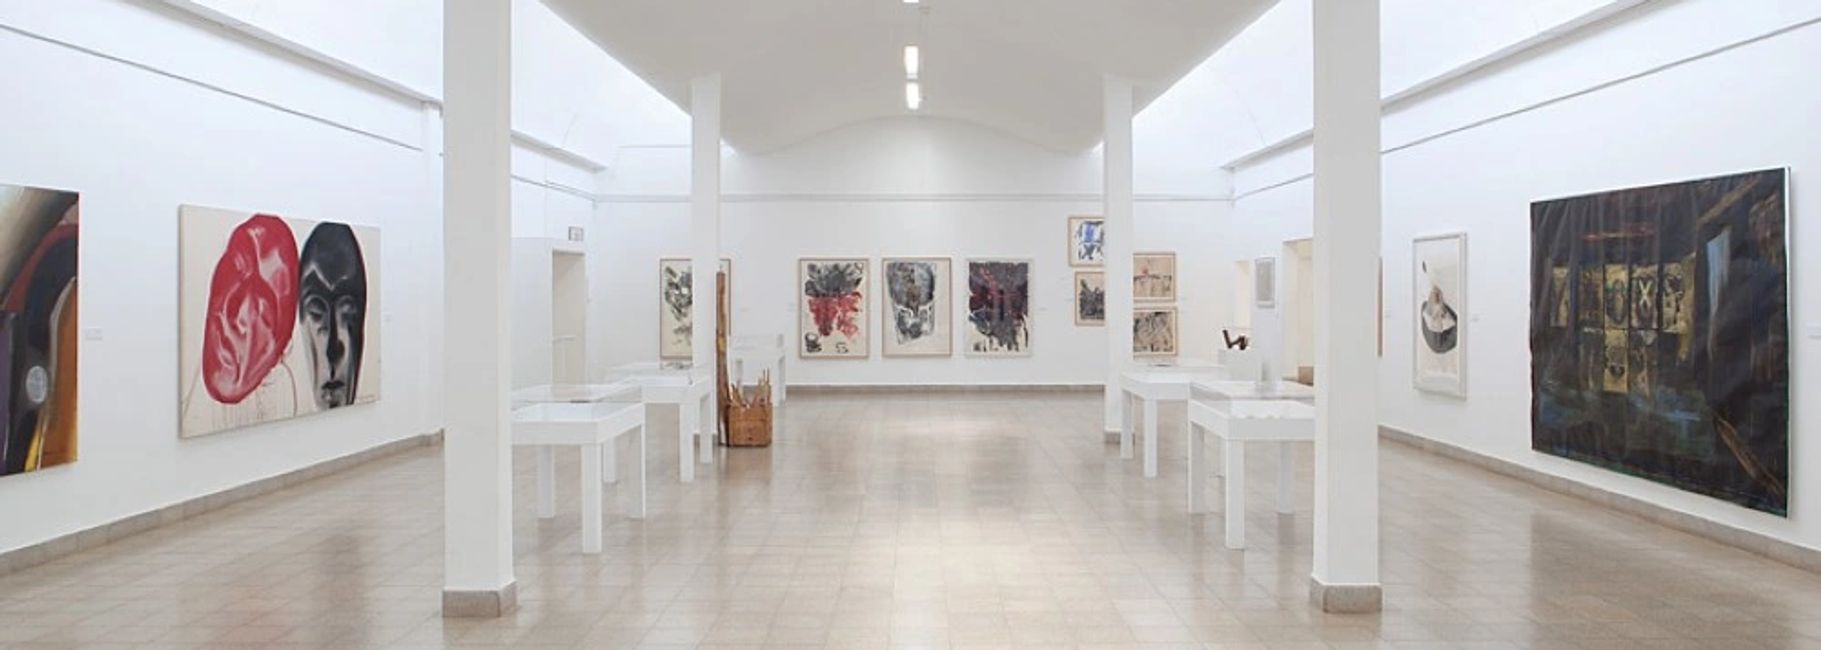 Visit the Mishkan Museum of Art on this exclusive Israeli art and cultural immersion tour Mar. 24-29